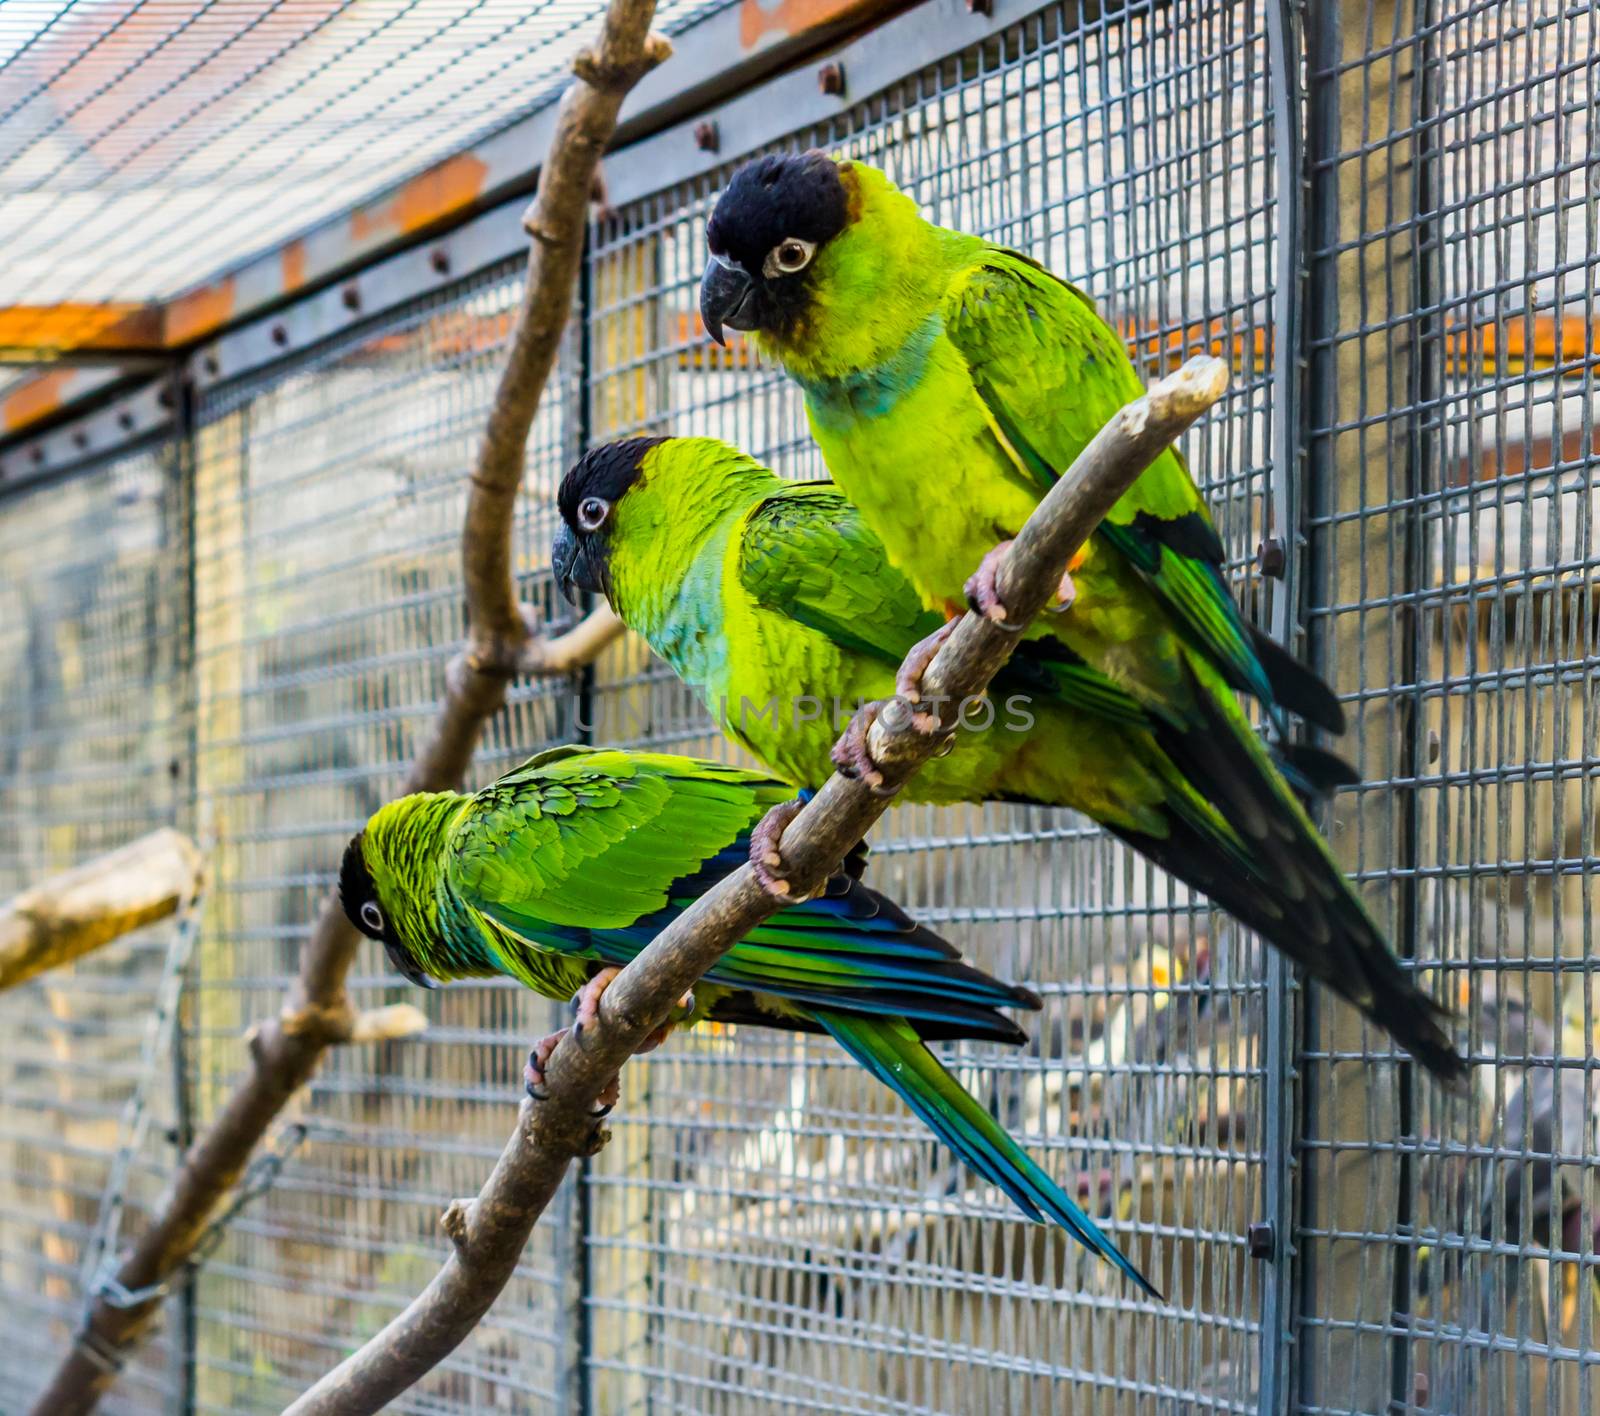 Three Nanday conures sitting together on a branch in the aviary, Popular pets in aviculture, Tropical small parrots from America by charlottebleijenberg